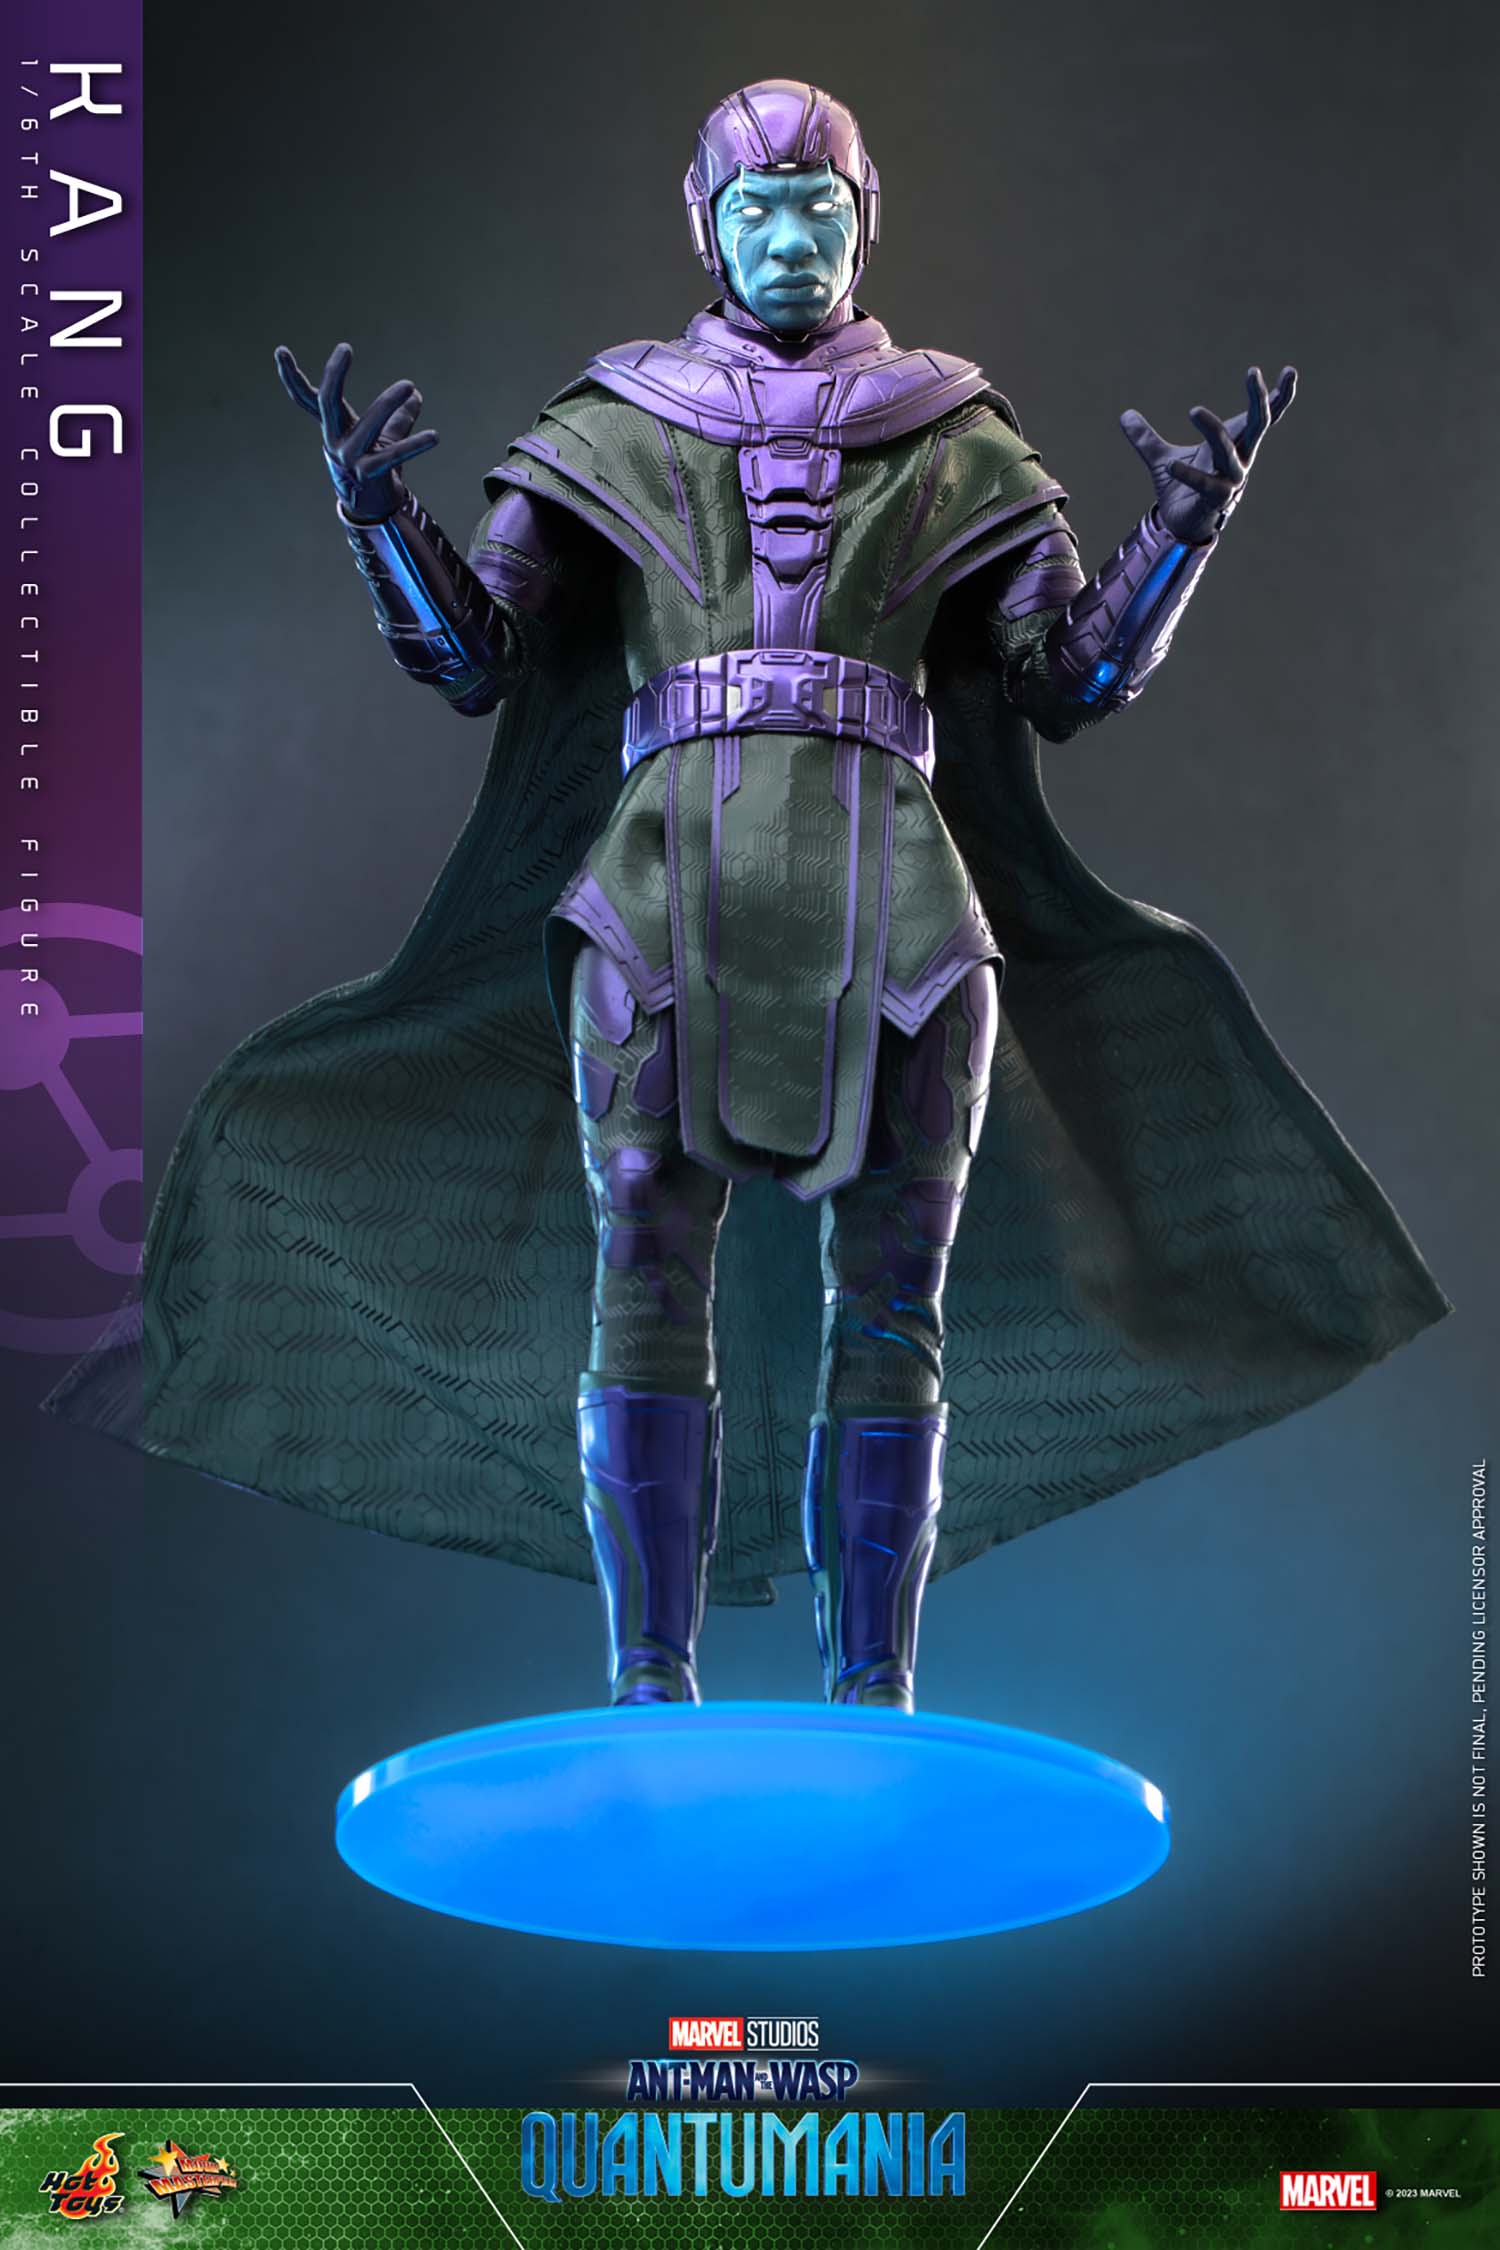 Marvel Legends Kang the Conqueror Figure Video Review And Images